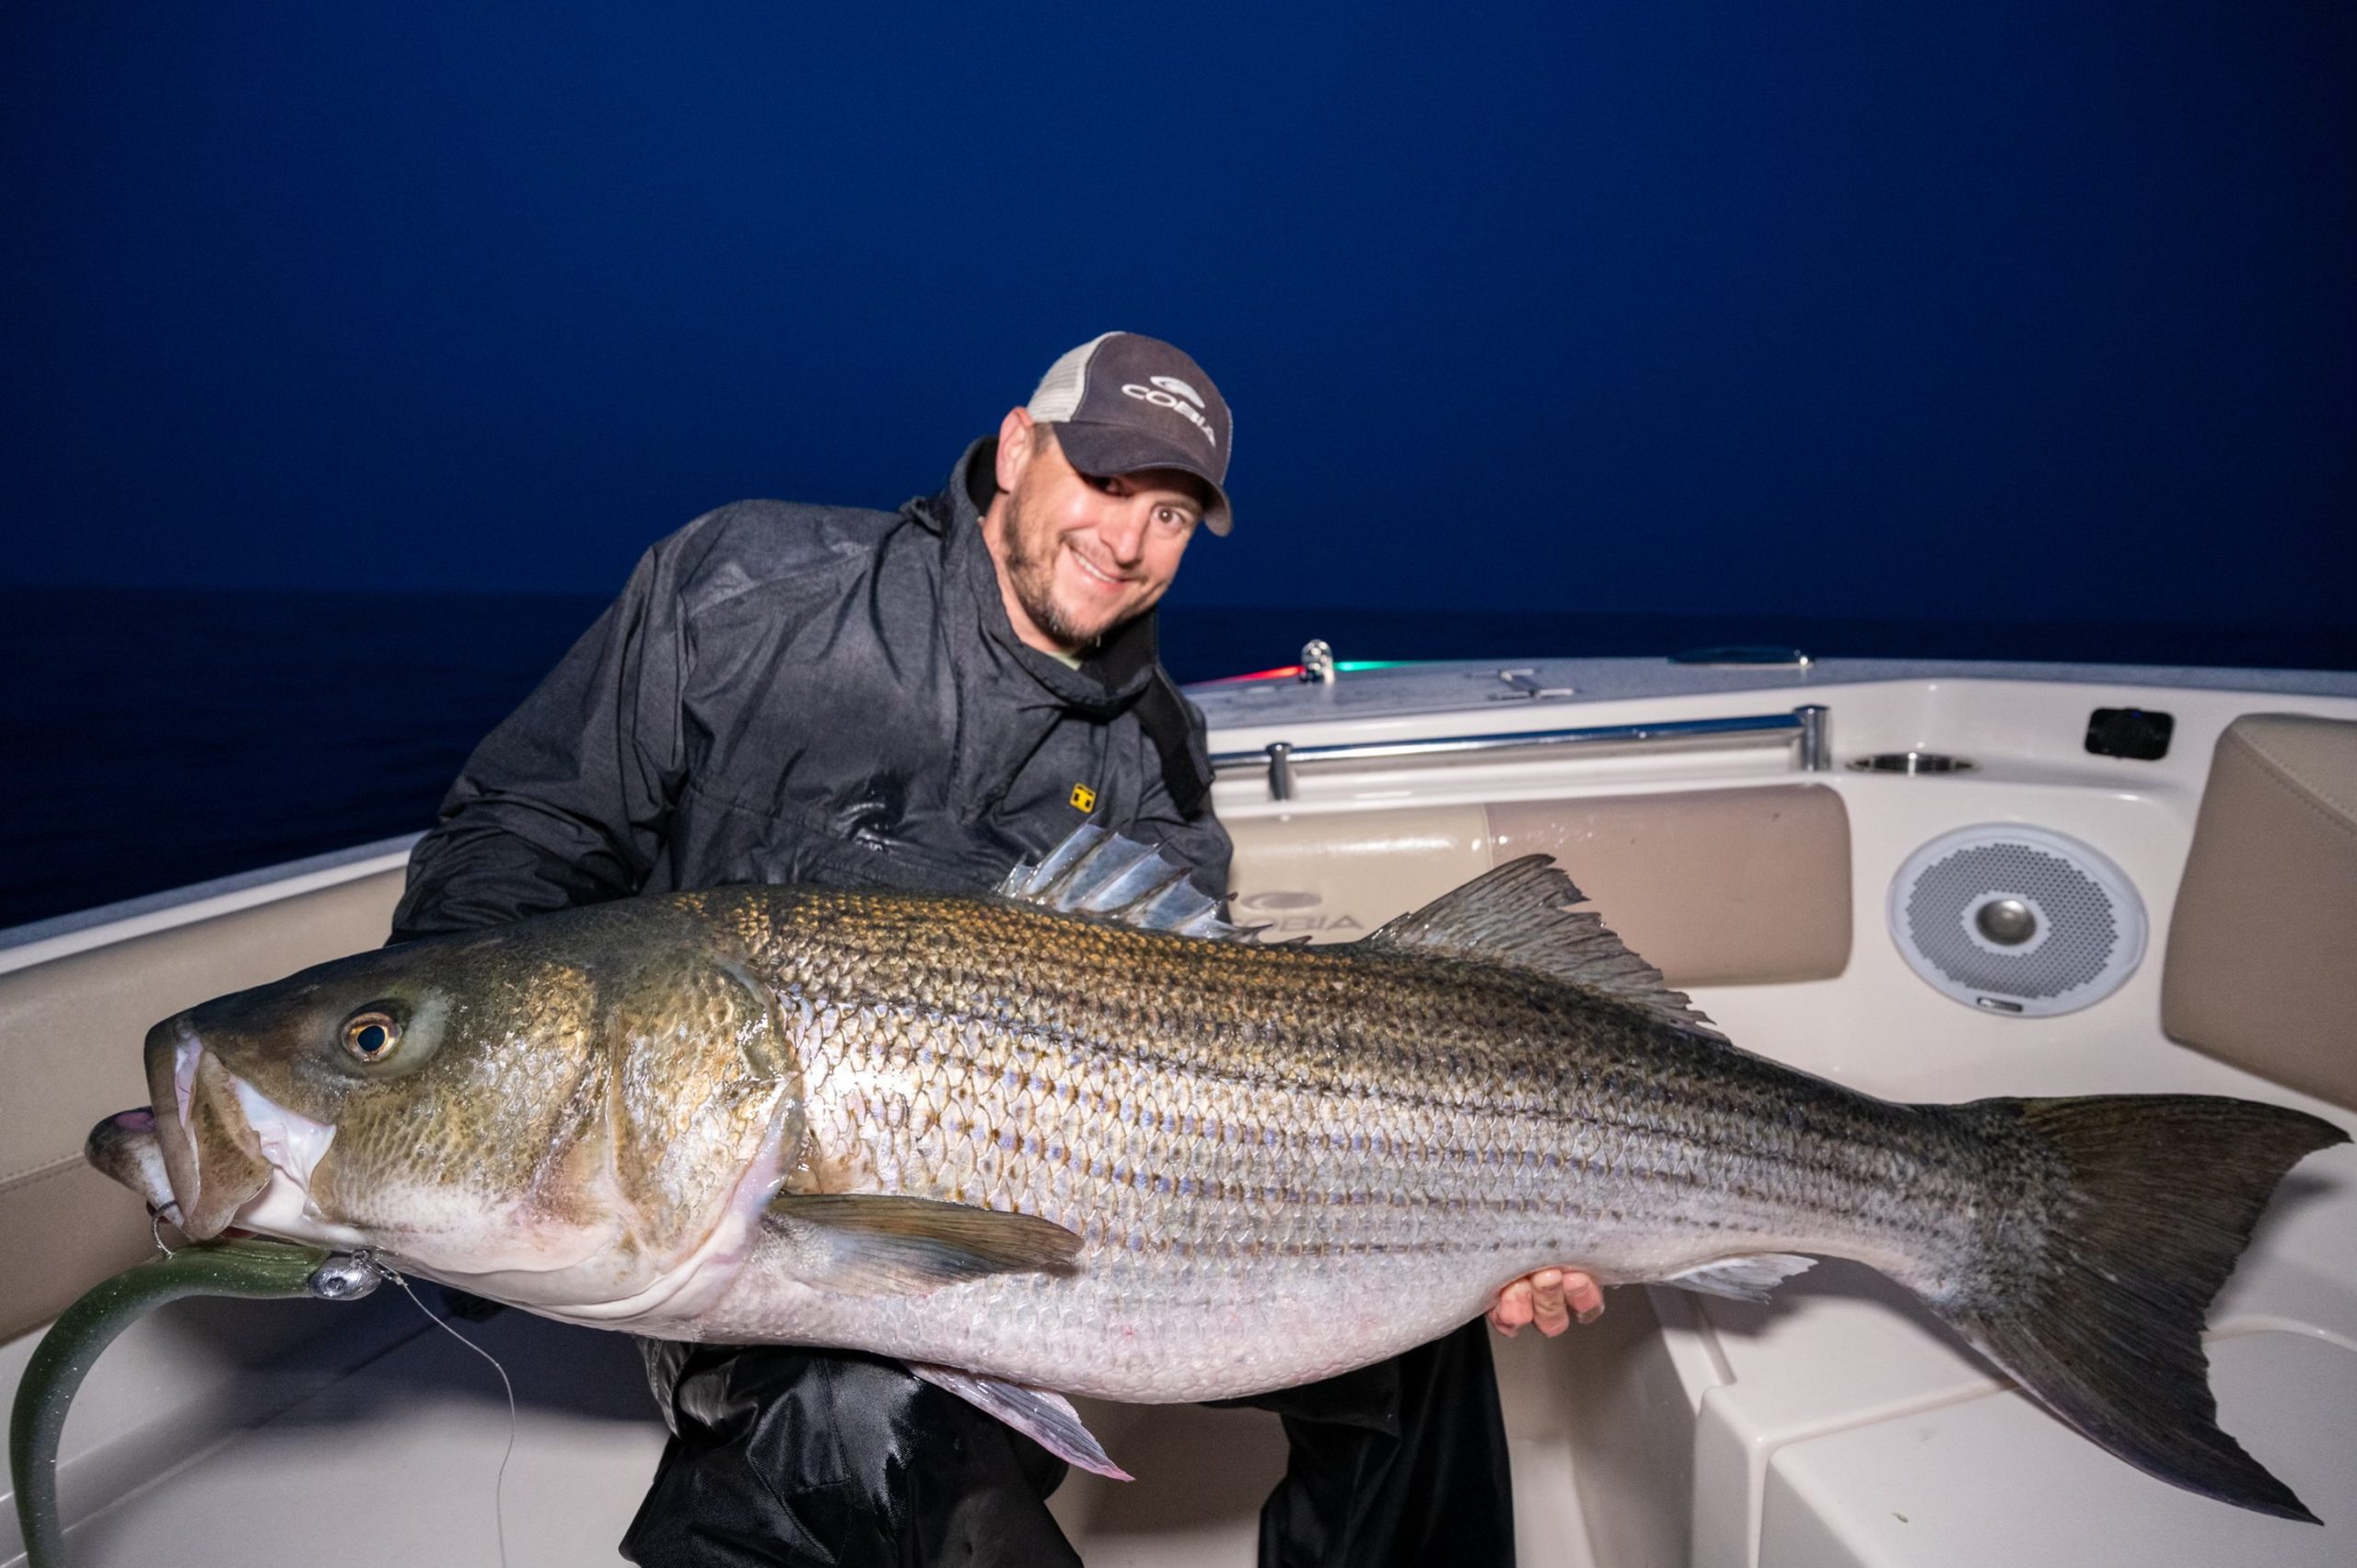 Striper Fishing With JoeBaggs New 12.5-Inch Patriot Fish - On The Water